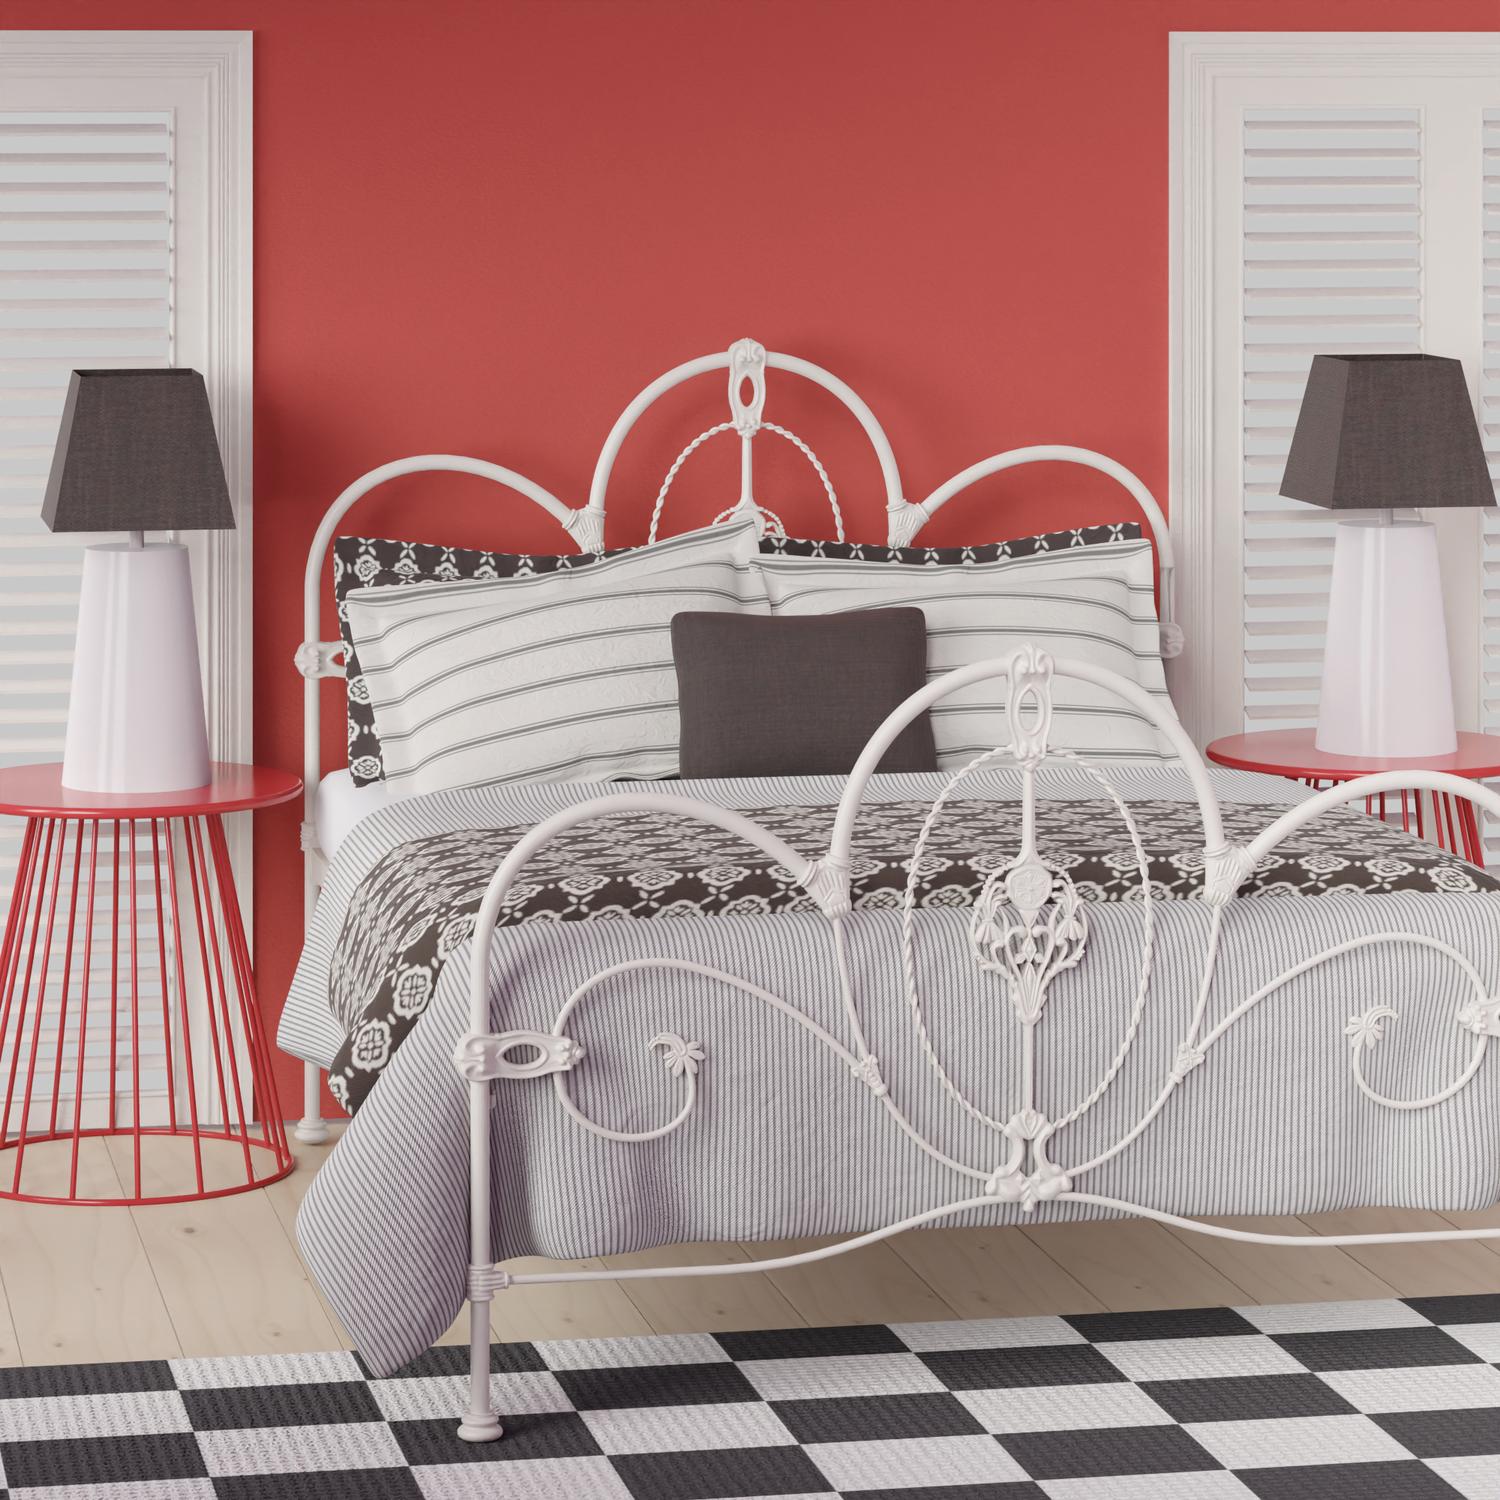 Ballina iron bed frame - Red bedroom